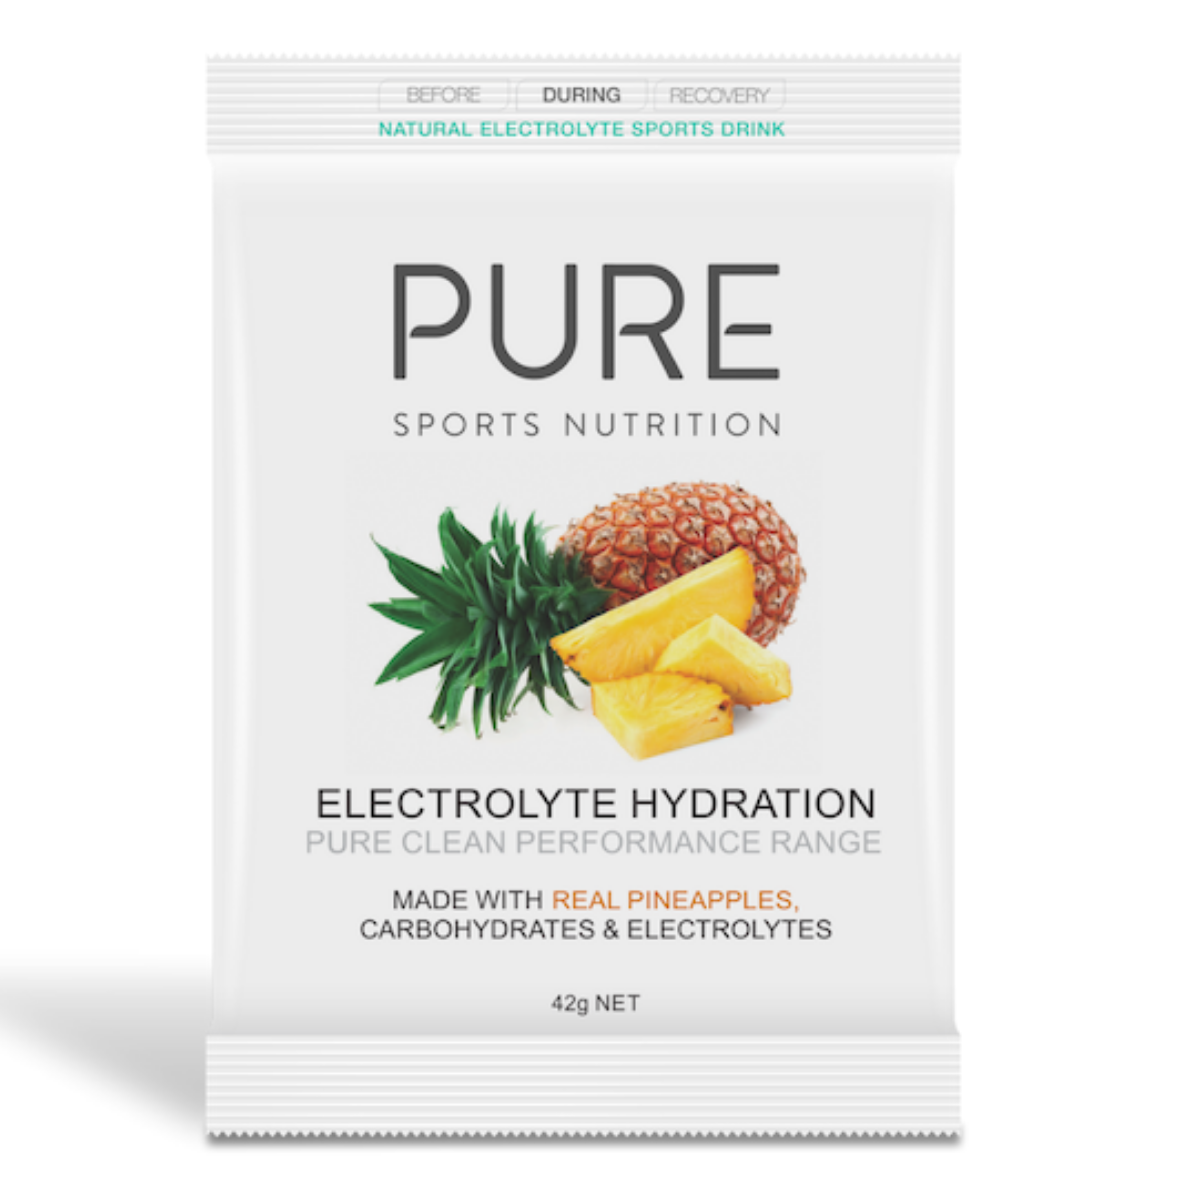 PURE Sports Nutrition Pineapple Electrolyte Hydration Drink